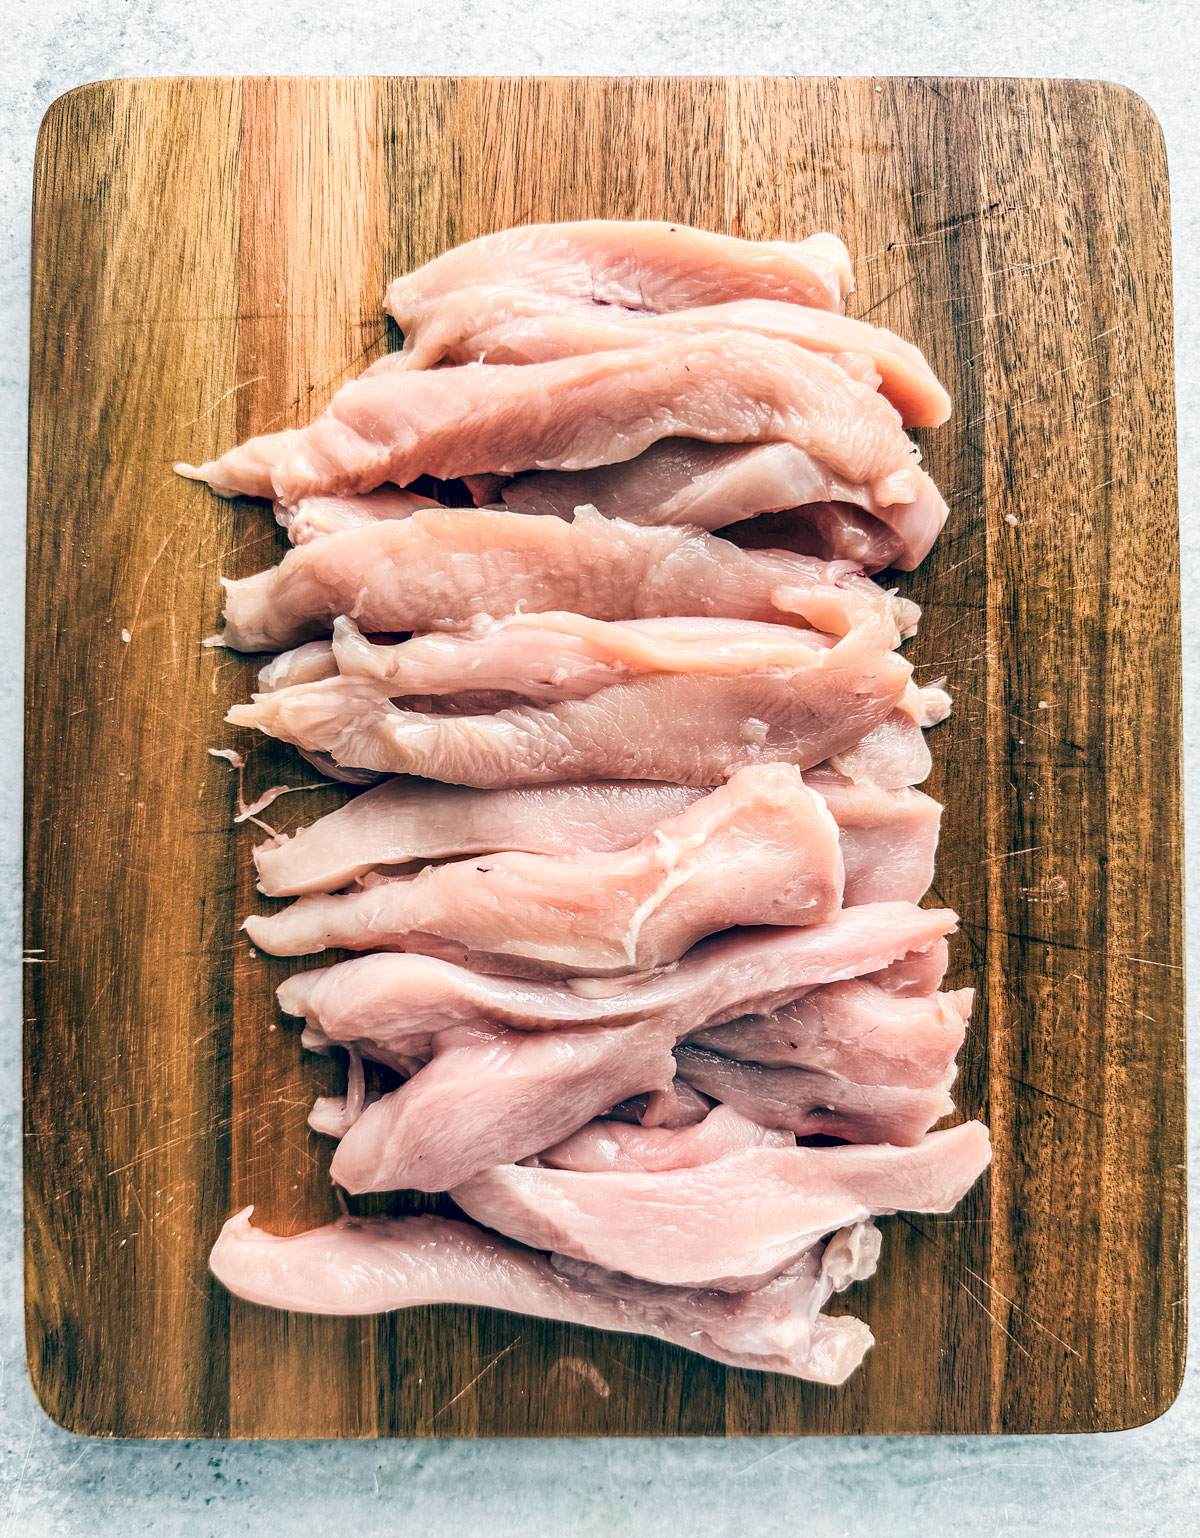 Chicken breasts cut into strips on a cutting board.